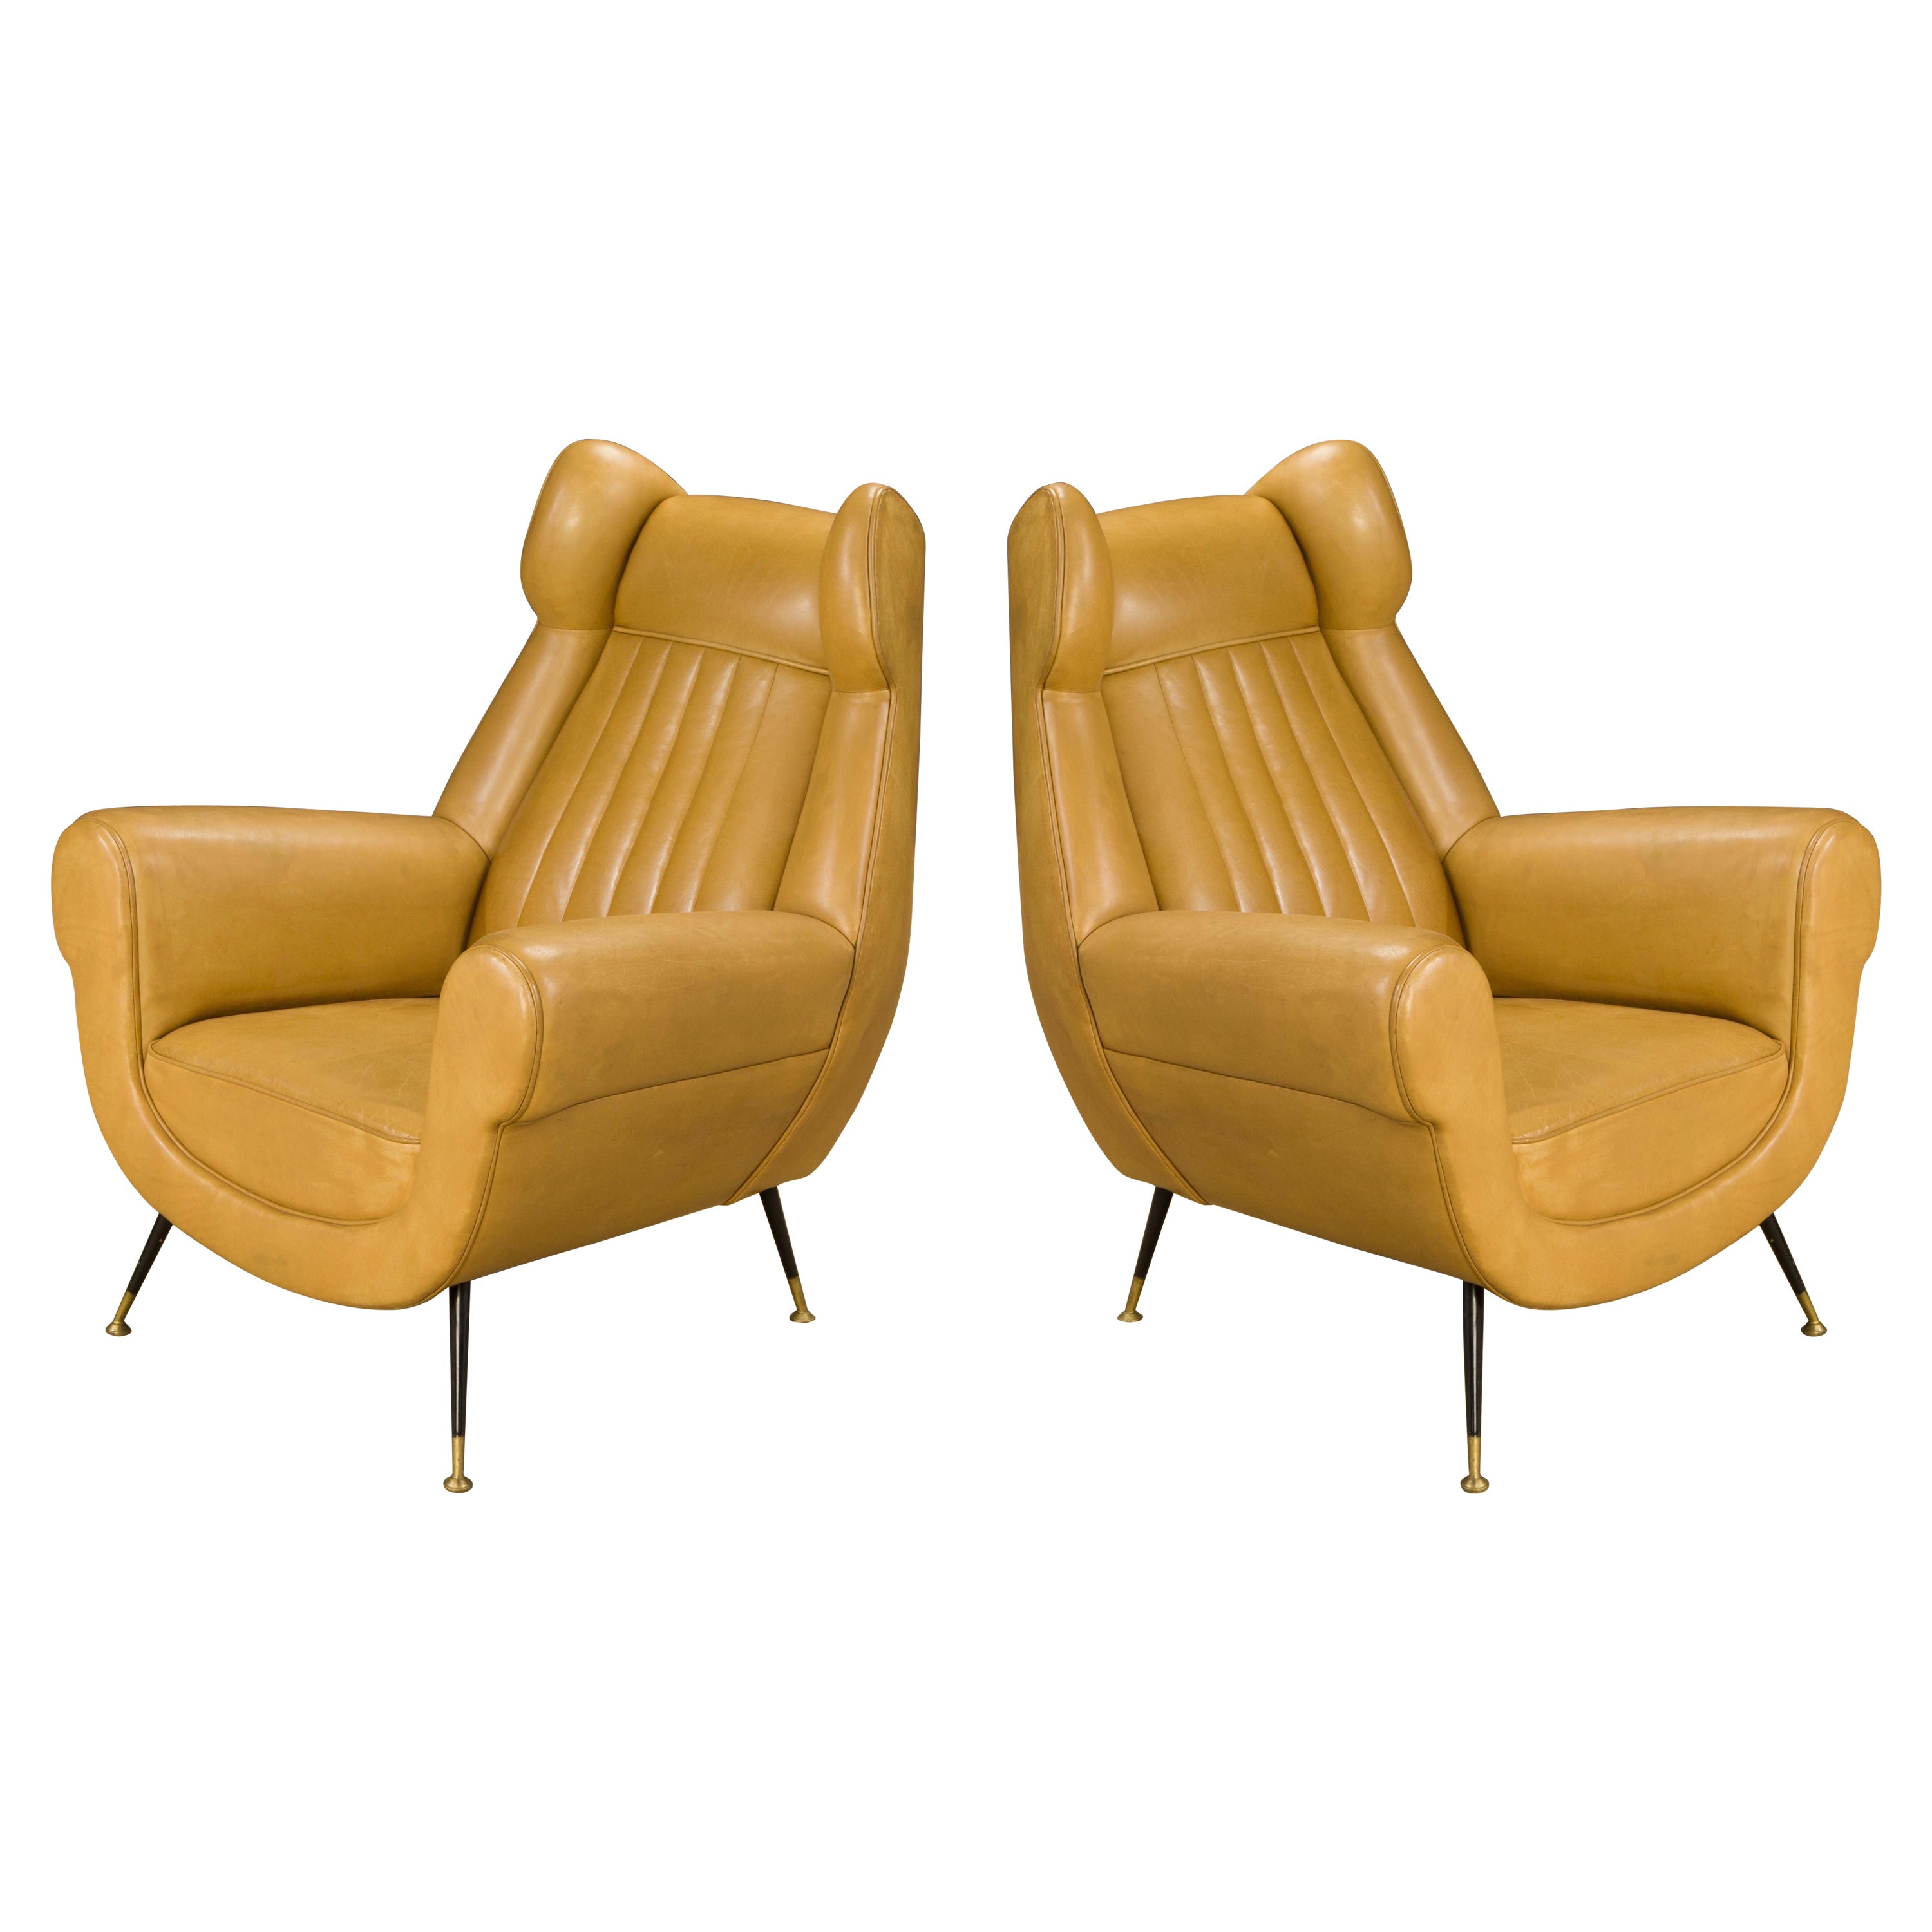 Pair of Gigi Radice for Minotti Leather Wingback Lounge Chairs, Italy, c. 1950s